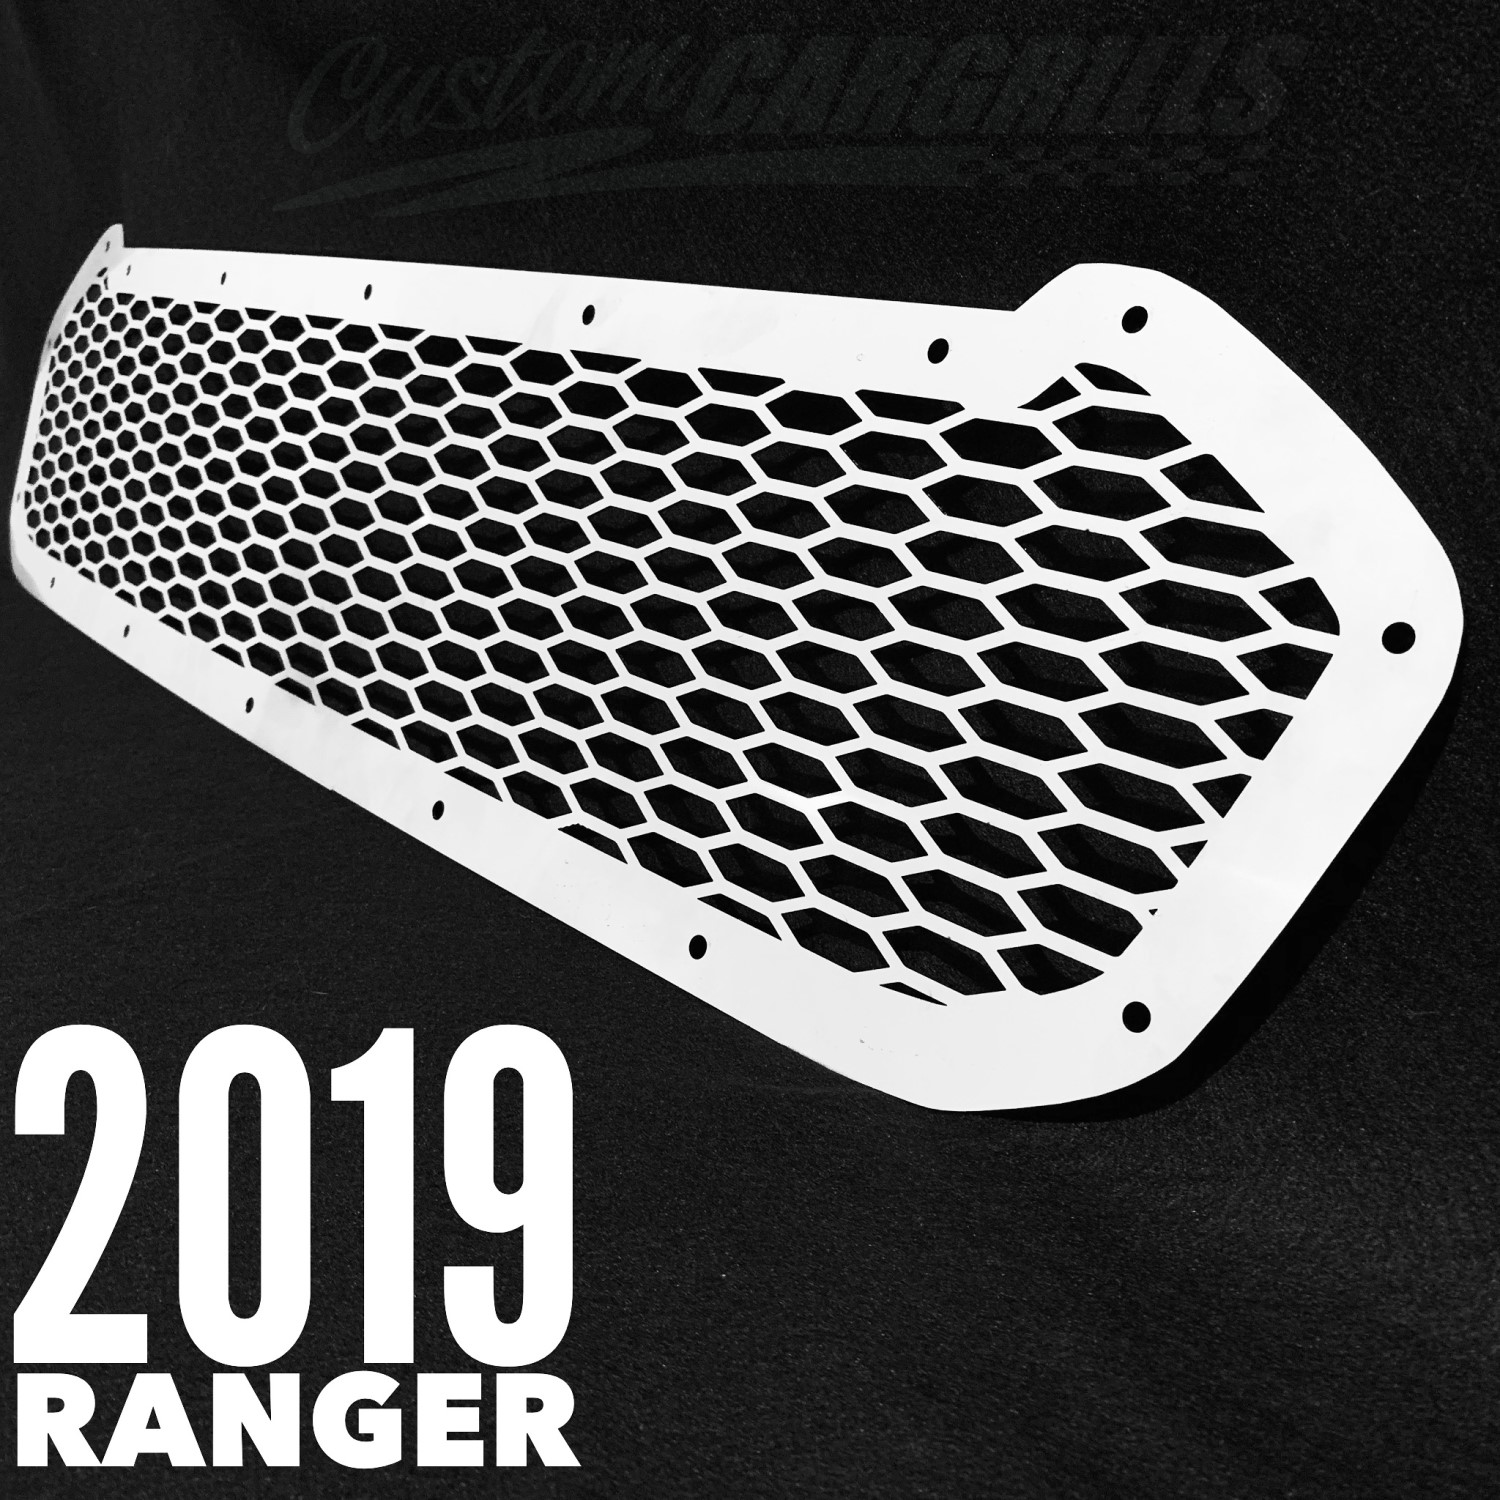 Raptor-Inspired Laser Cut Grille Upgrade for 2019 Ford Ranger: A Must-Have for Off-Road Enthusiasts